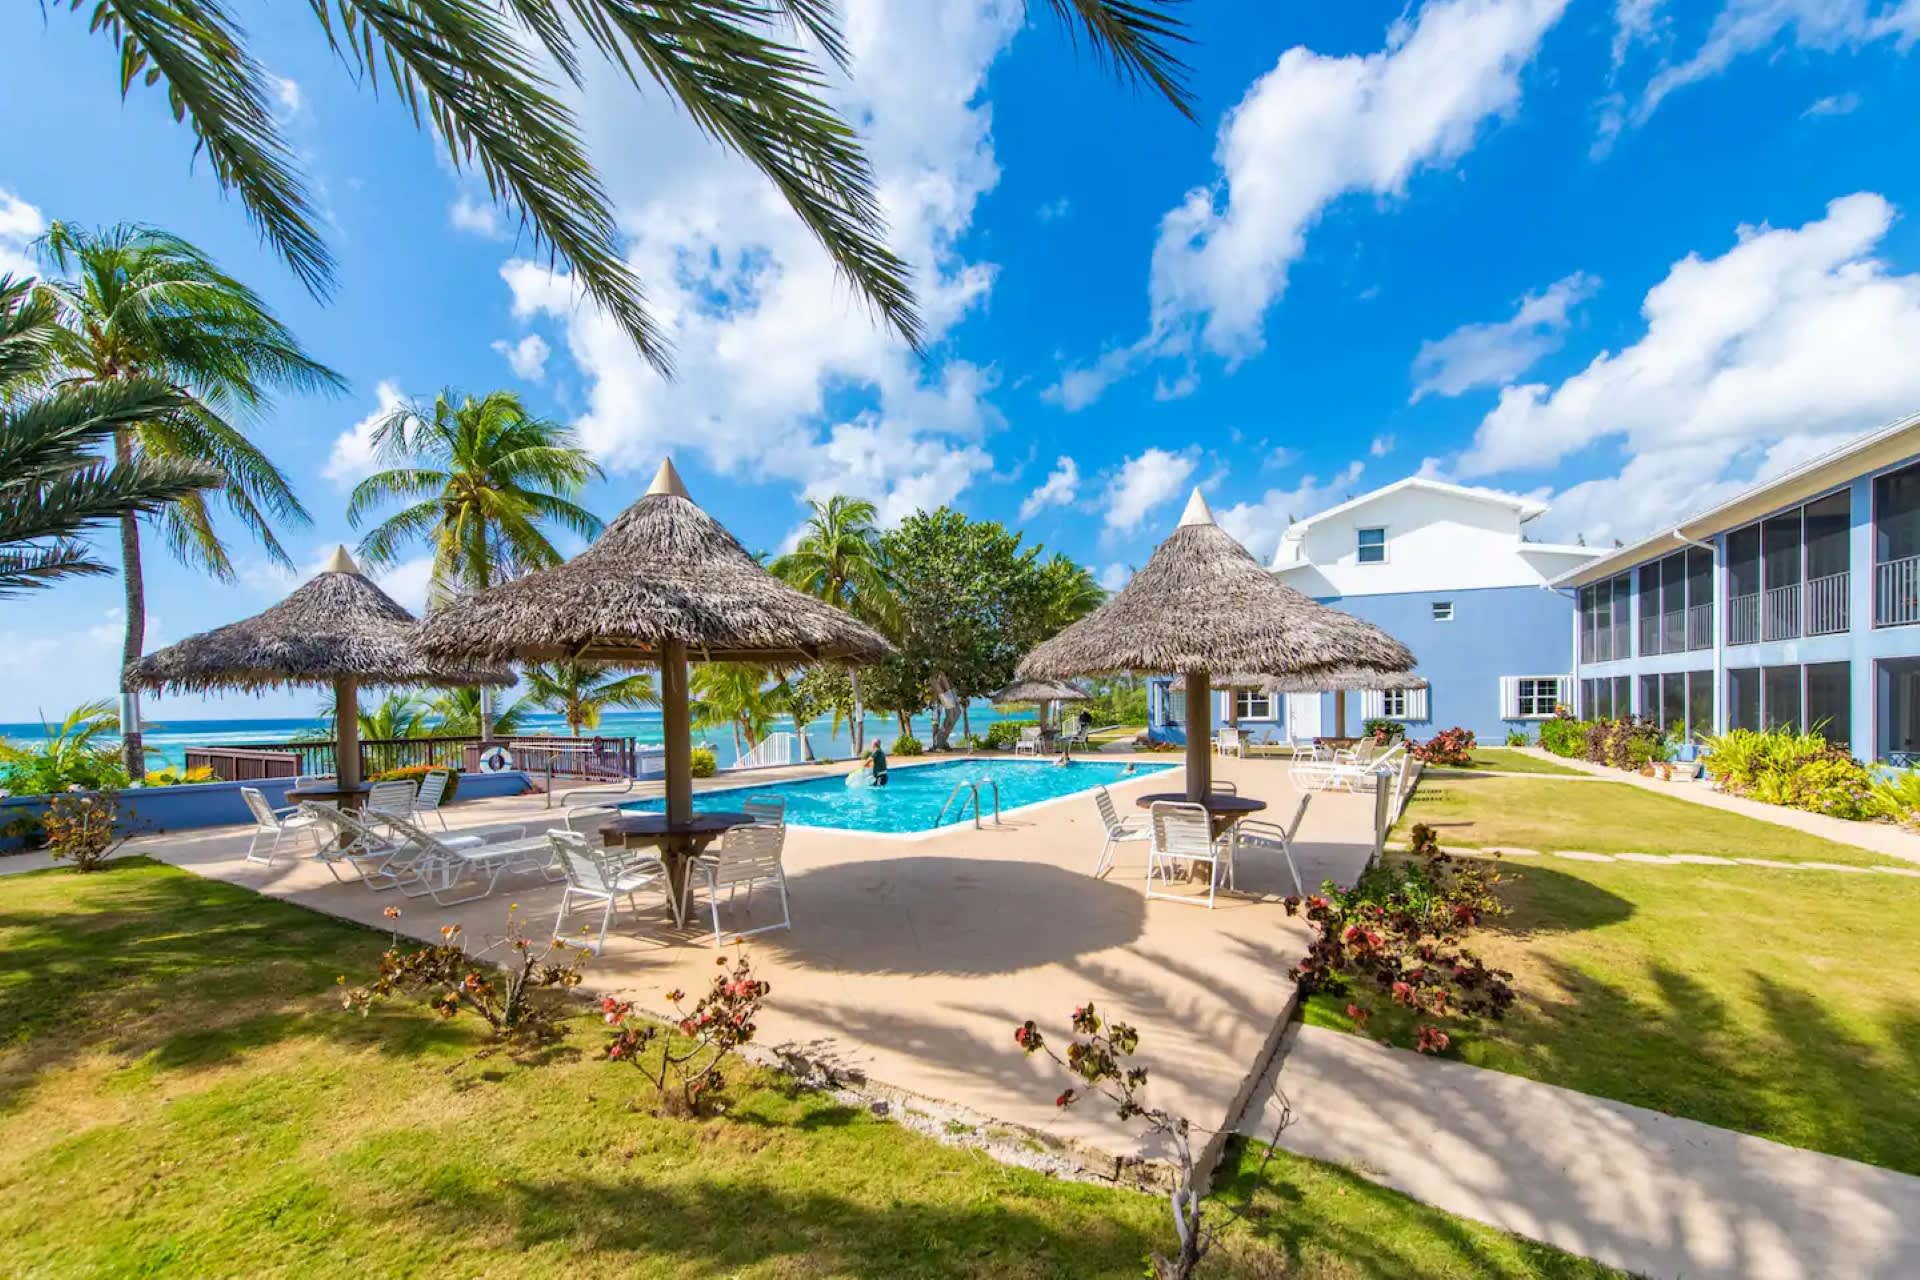 Swimming pool with beautiful ocean views. Sun deck, thatch parasol tables, chairs and loungers provided.